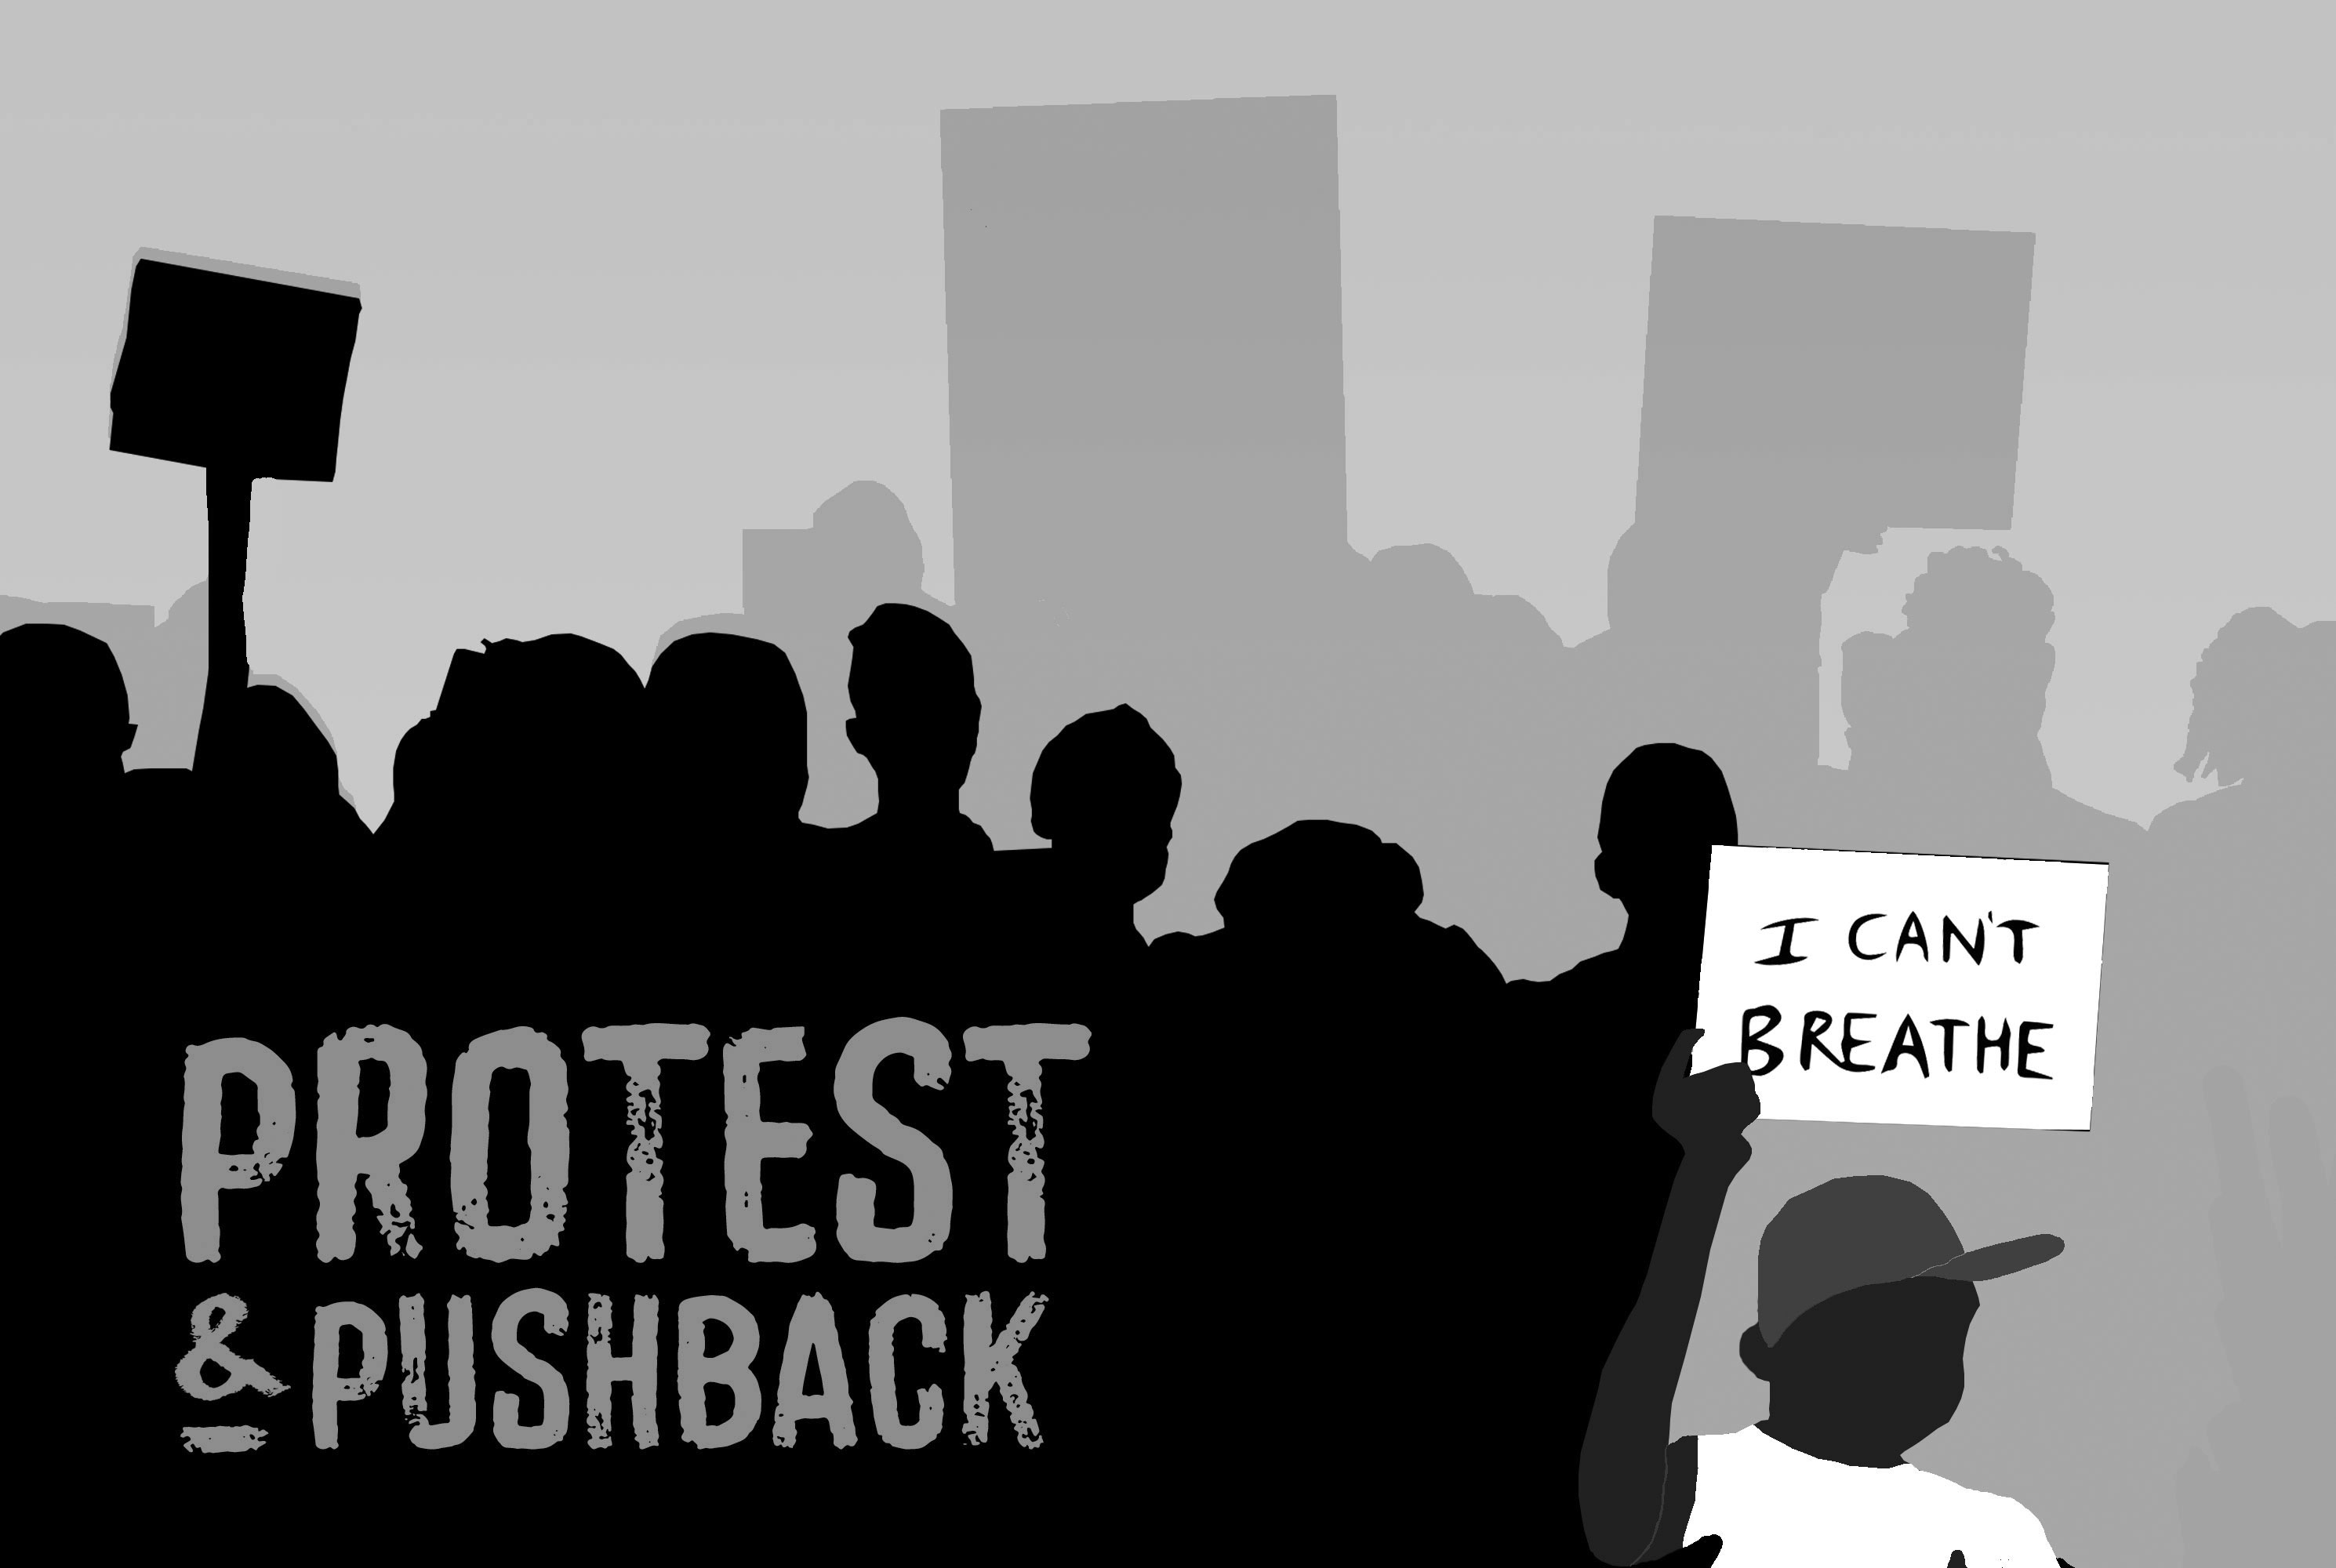 Black and white illustration of a Black male Black Lives Matter protester in the foreground holding a sign which reads, 'I CAN'T BREATHE' with a shadowy crowd of other protesters in the background.